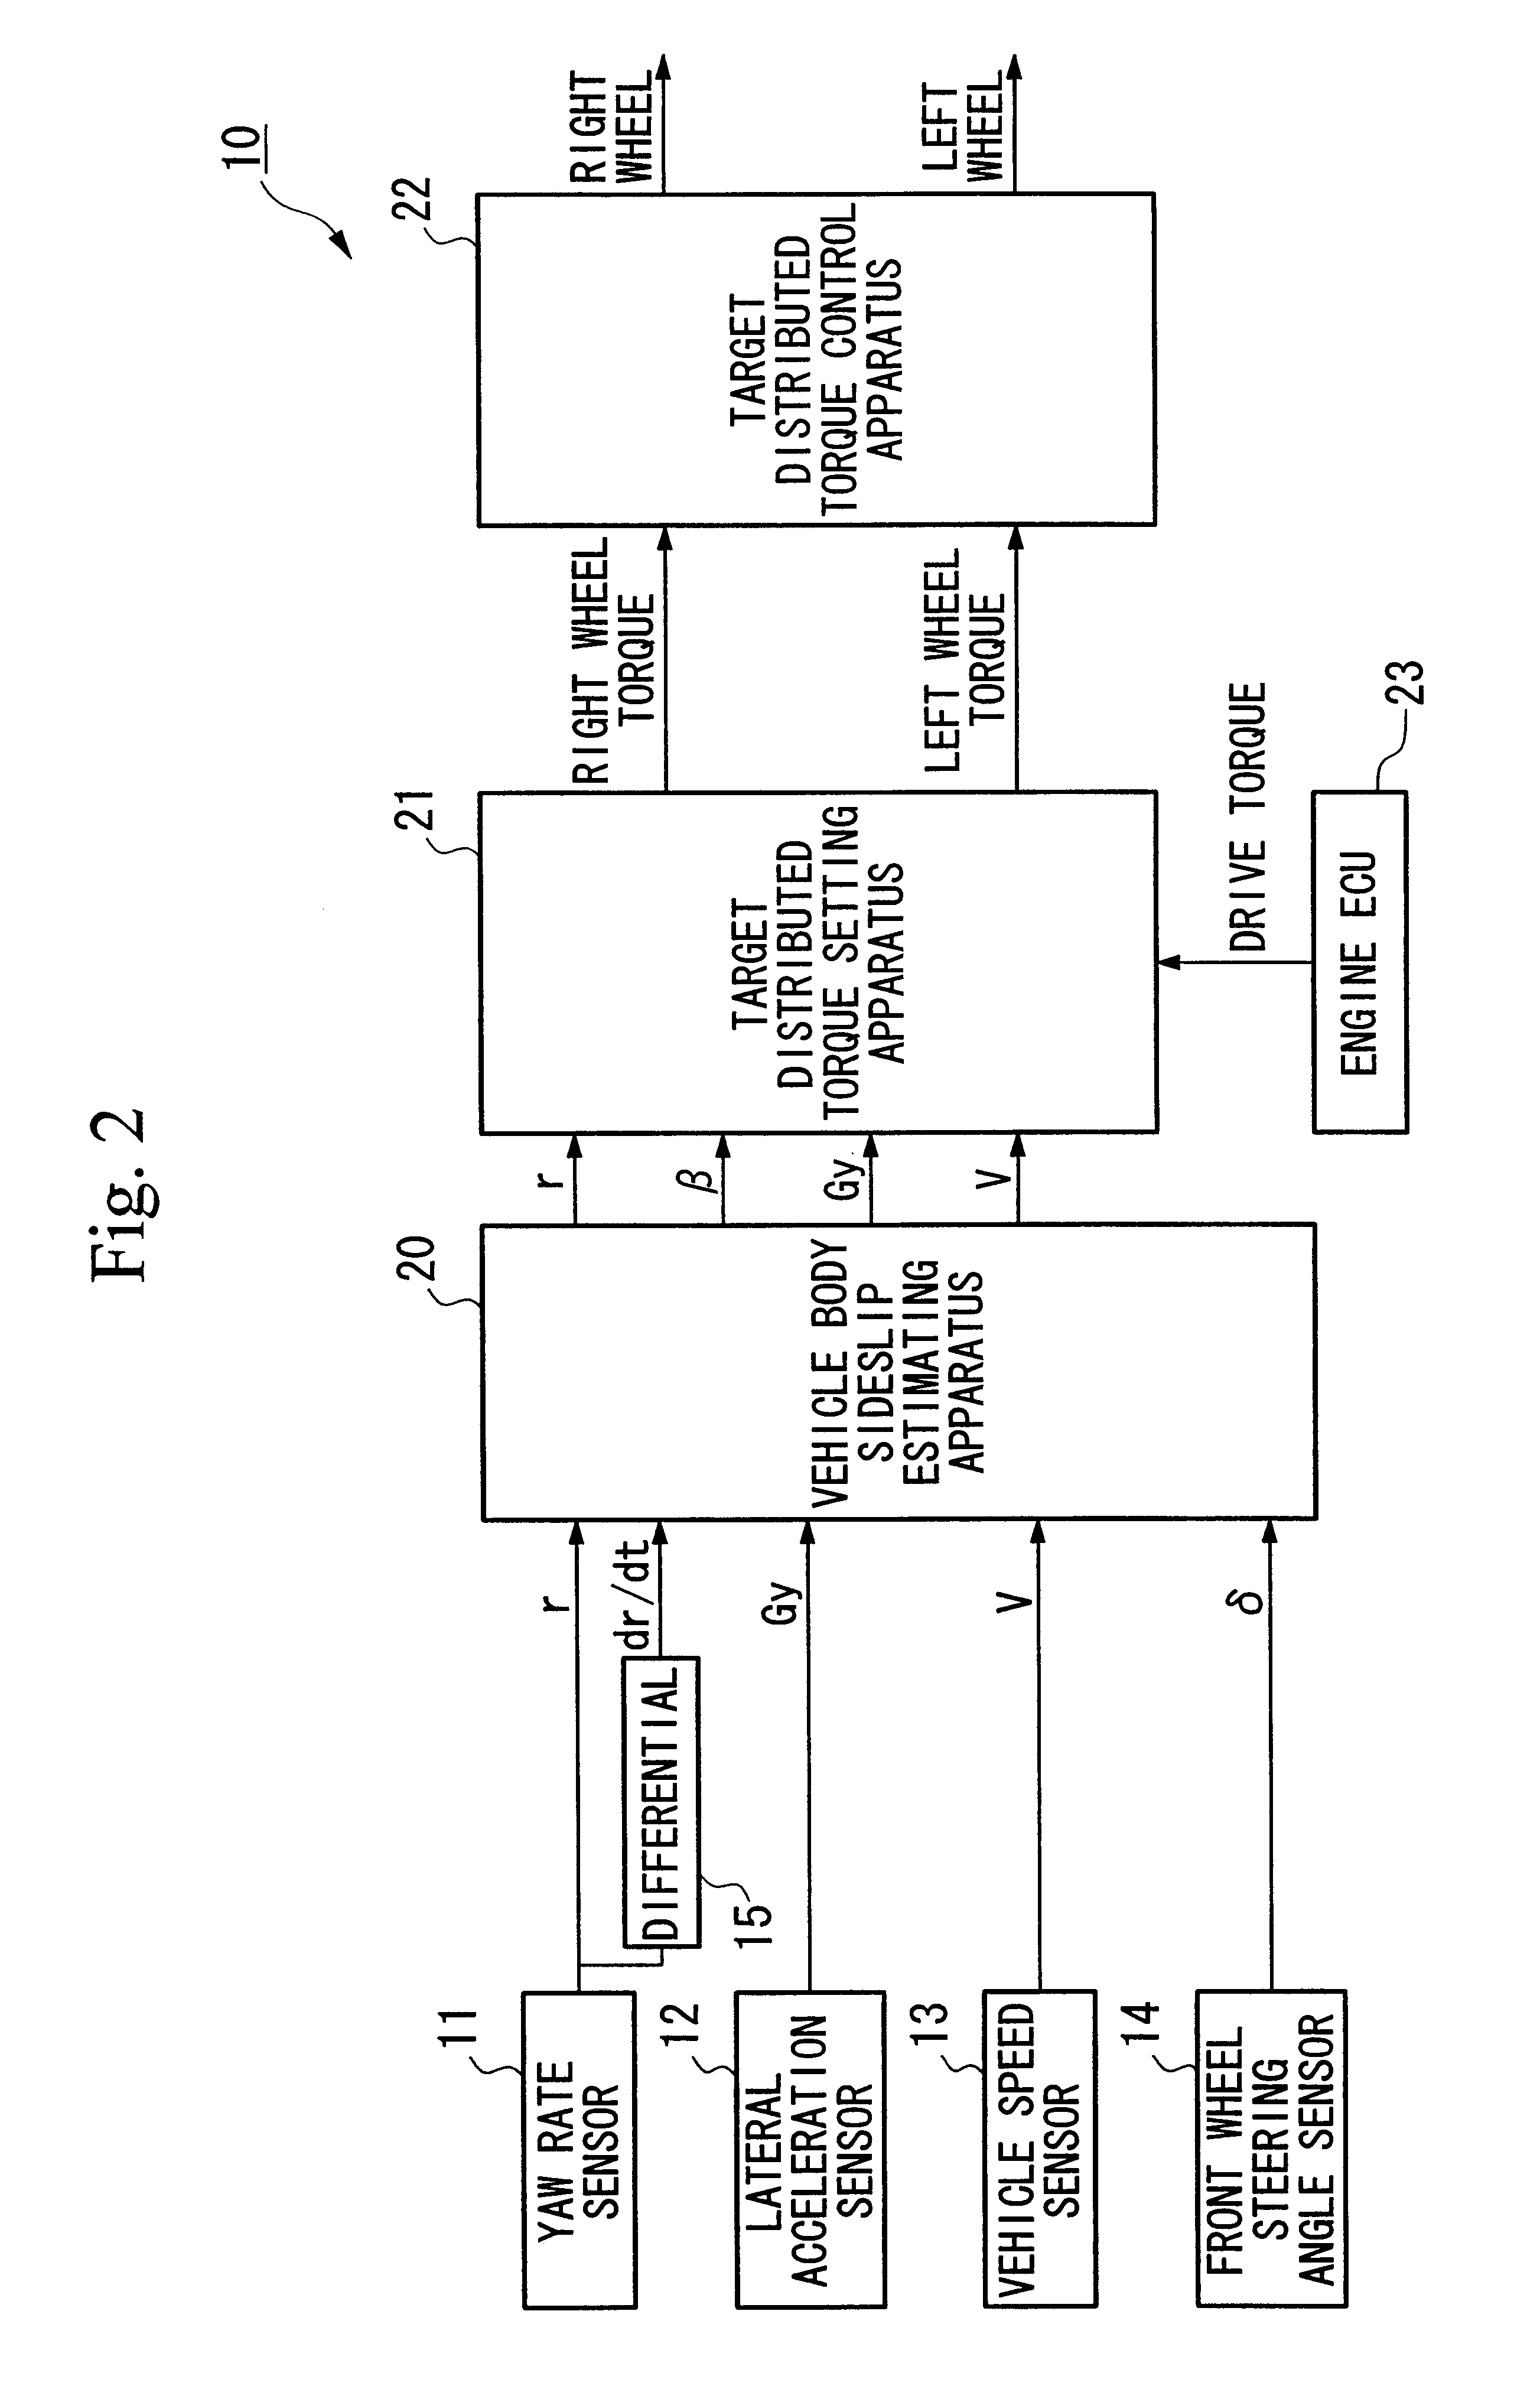 Method of estimating quantities that represent state of vehicle